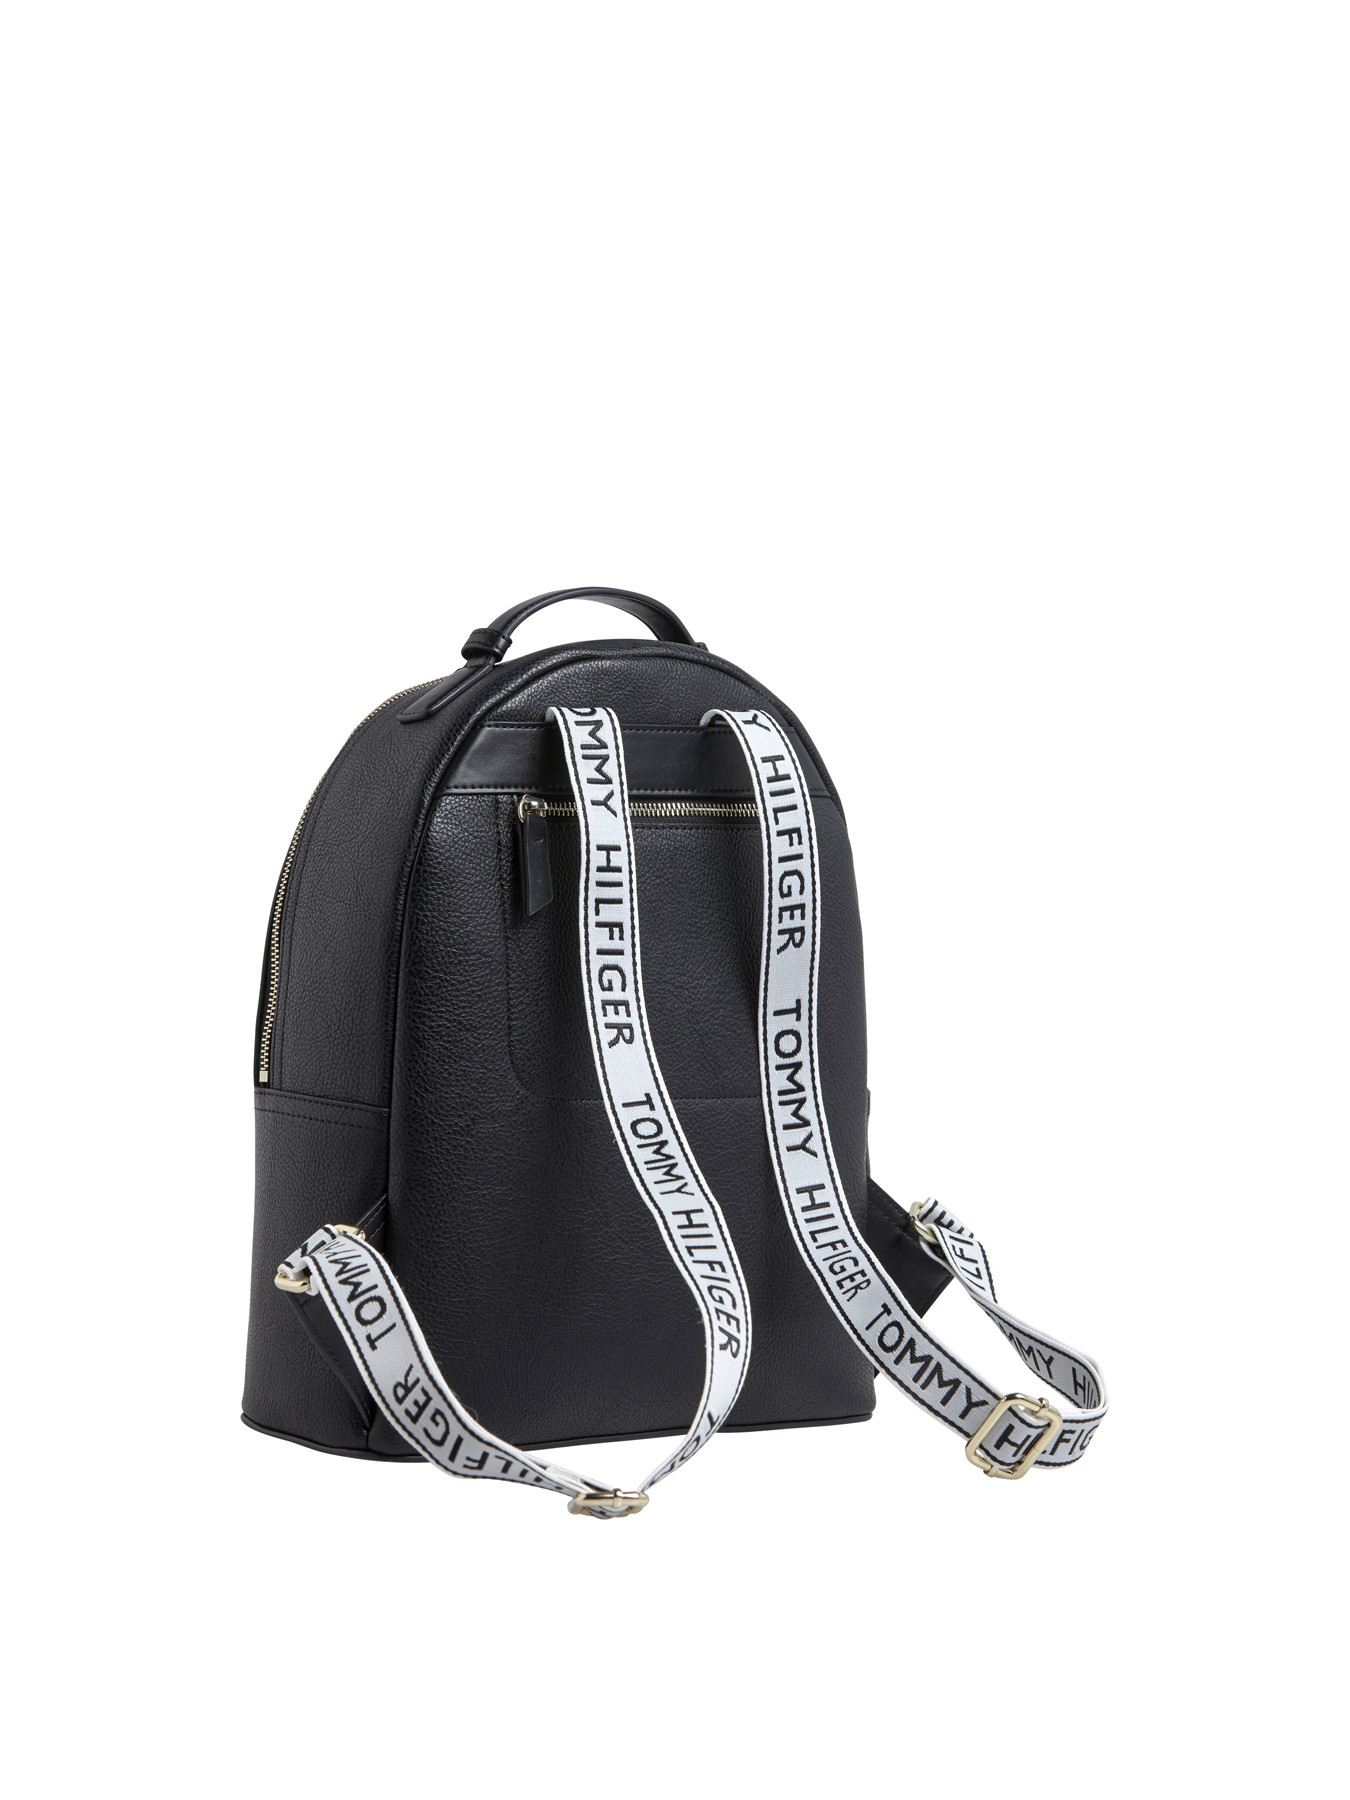 Women's Tommy Hilfiger Iconic Tommy Backpack | Fenwick